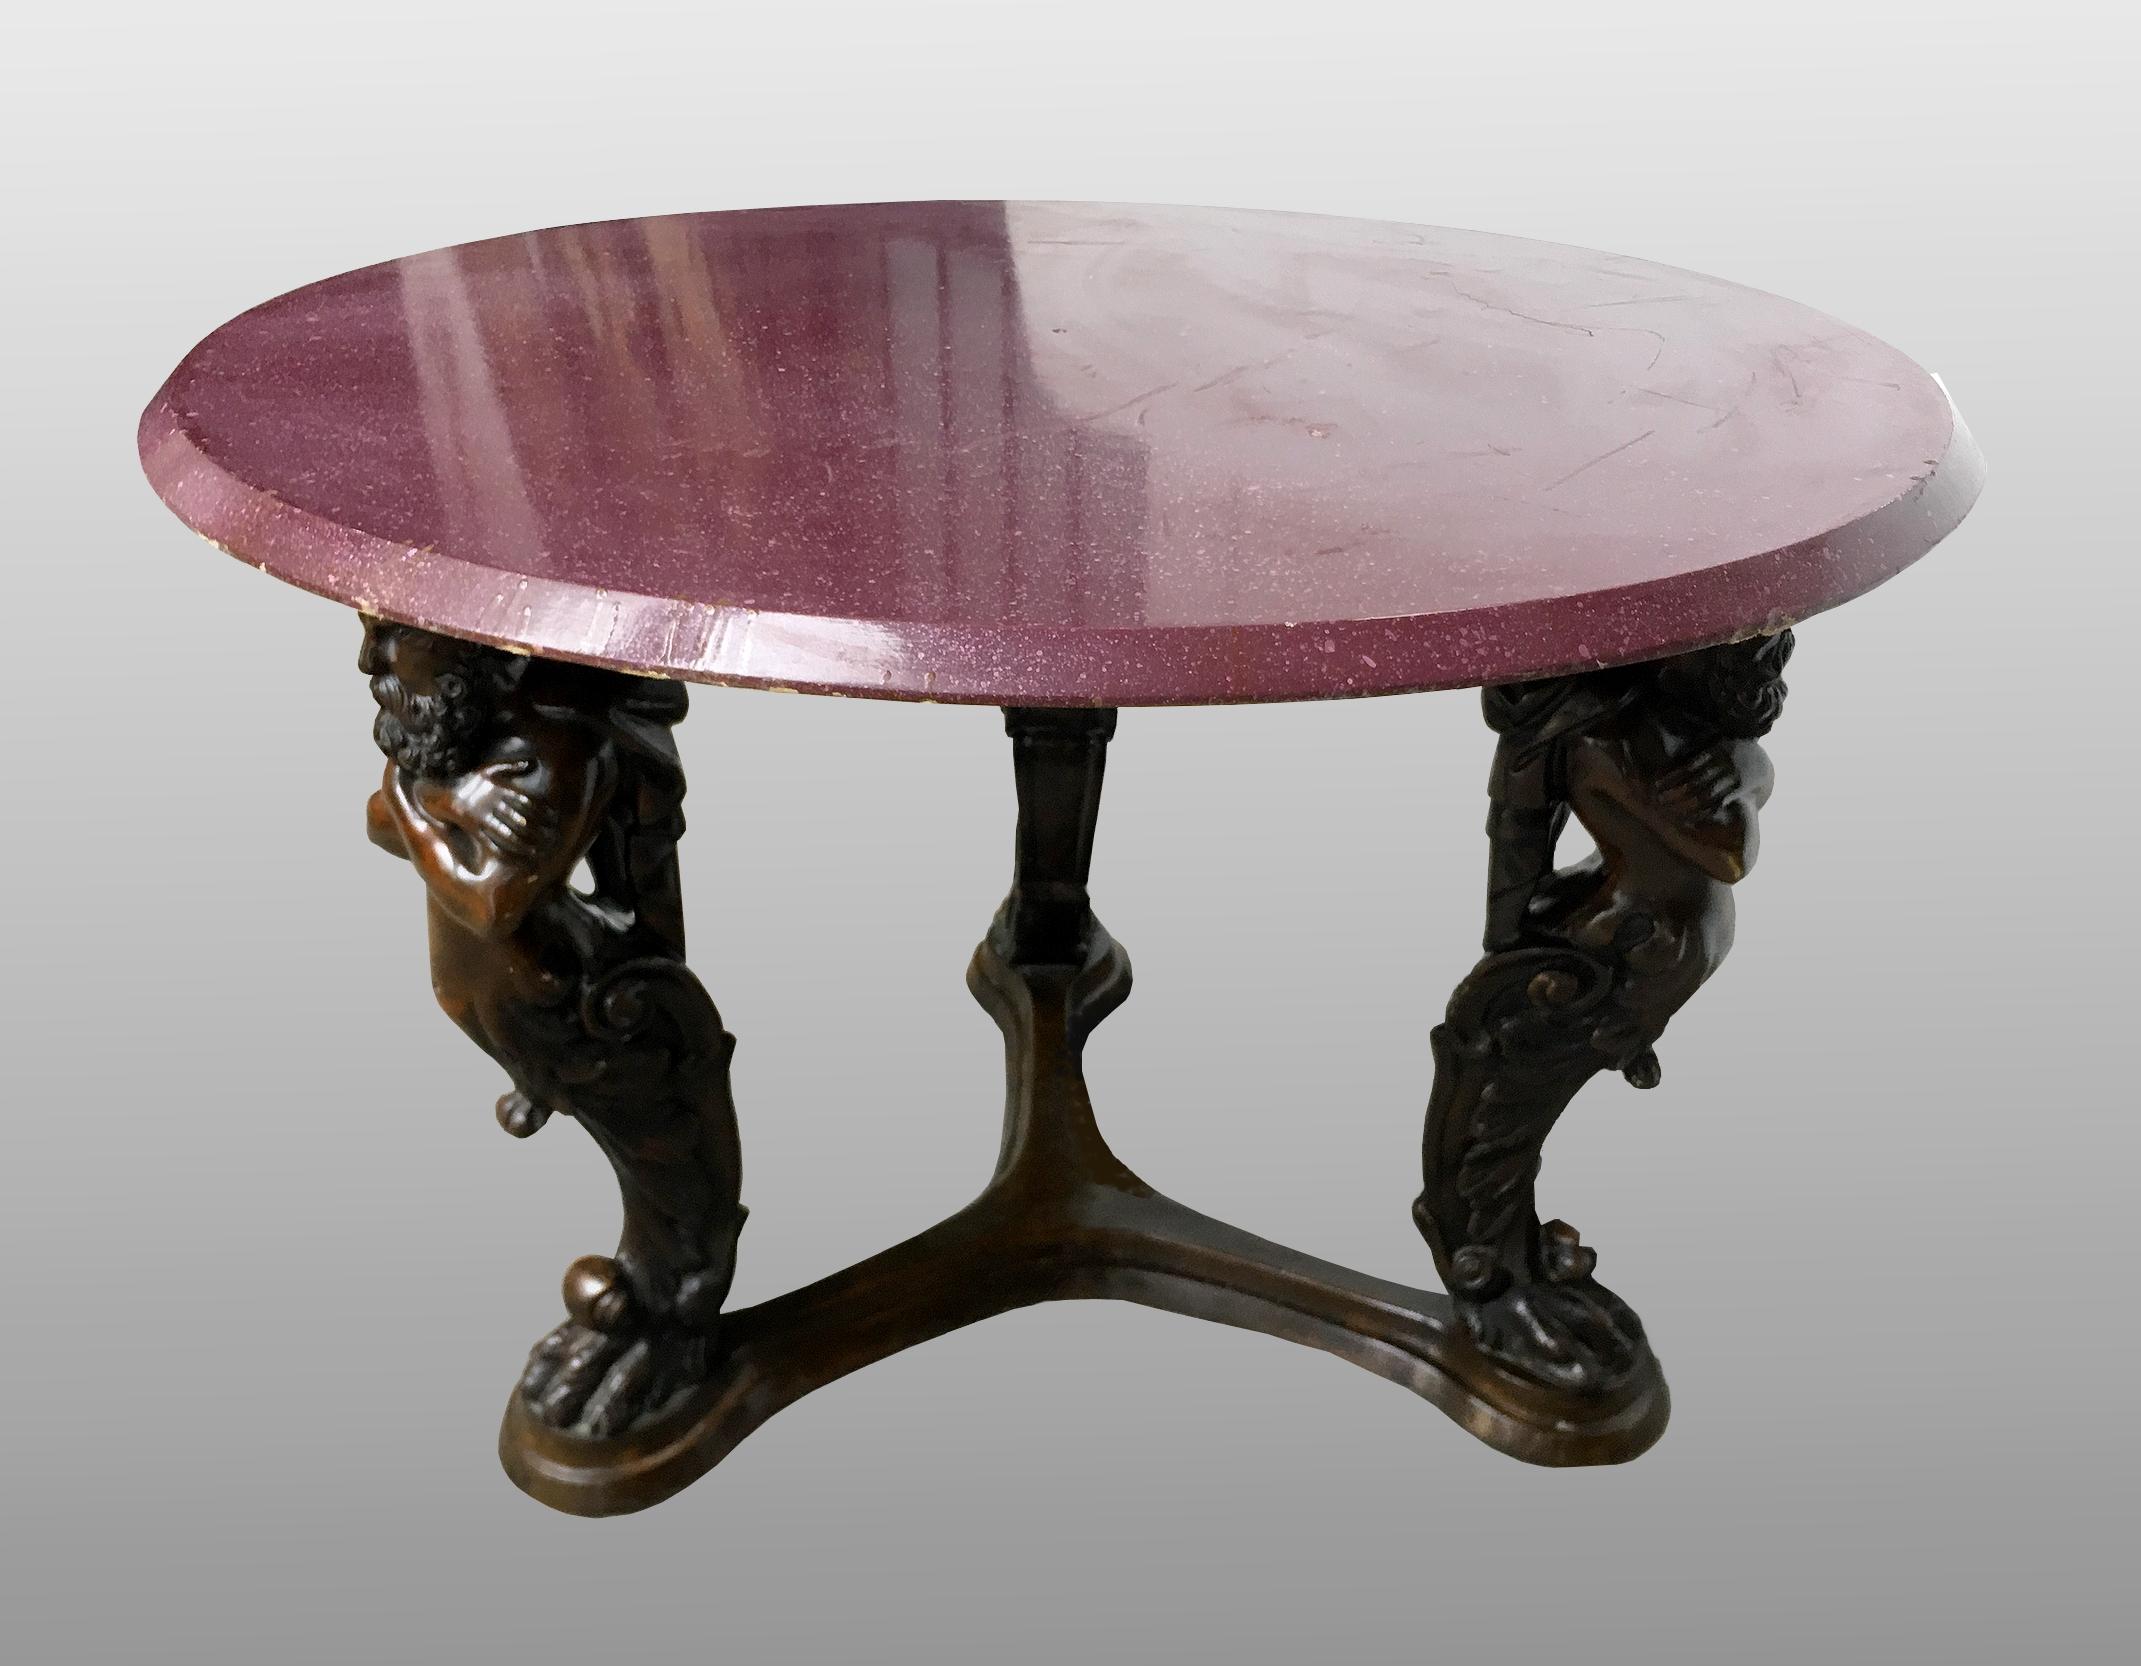 Large Italian bronze pedestal table, top painted in imitation of porphyry. The neoclassical bronze tripod base features three caryatids with the faces of bearded emperors connected by a molded spacer. The top is in wood, painted in trompe-l'oeil in